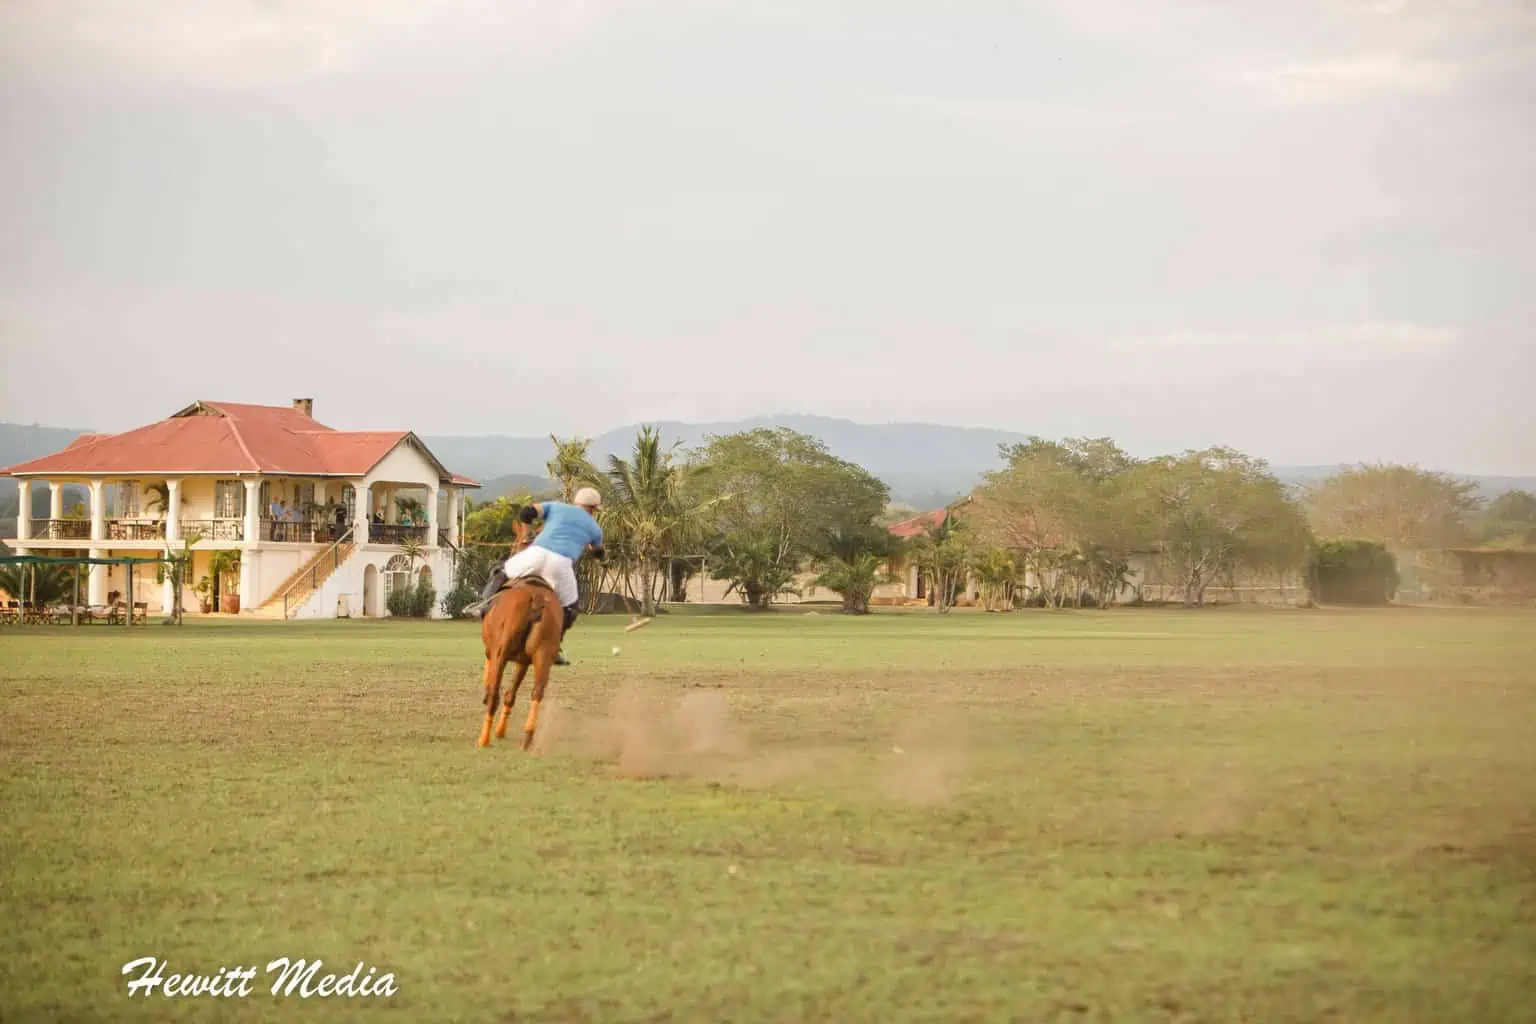 How to Visit the Nduruma Polo and Country Club in Tanzania